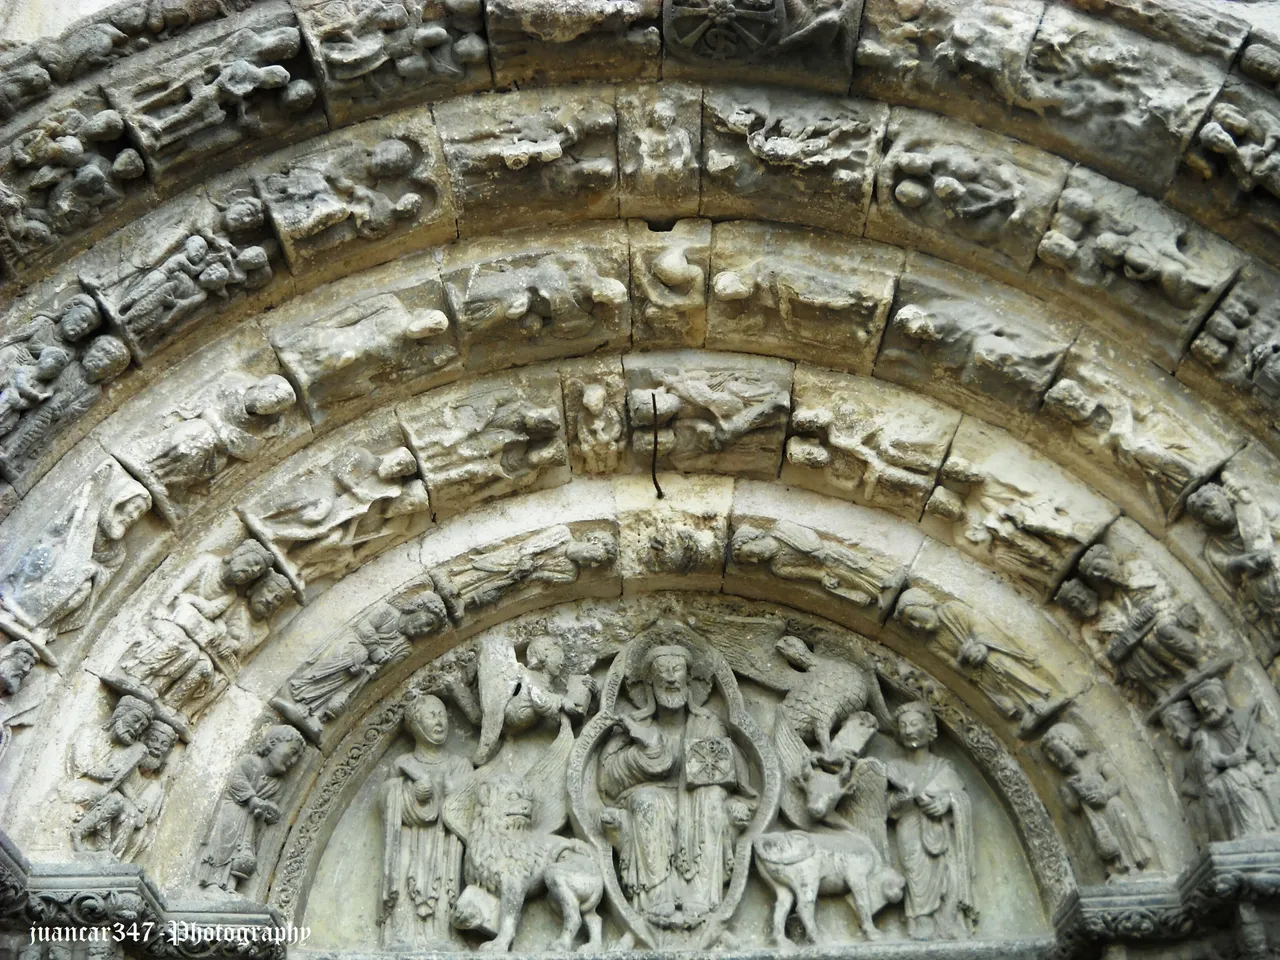 Vision of the Main Portal of the church of San Miguel